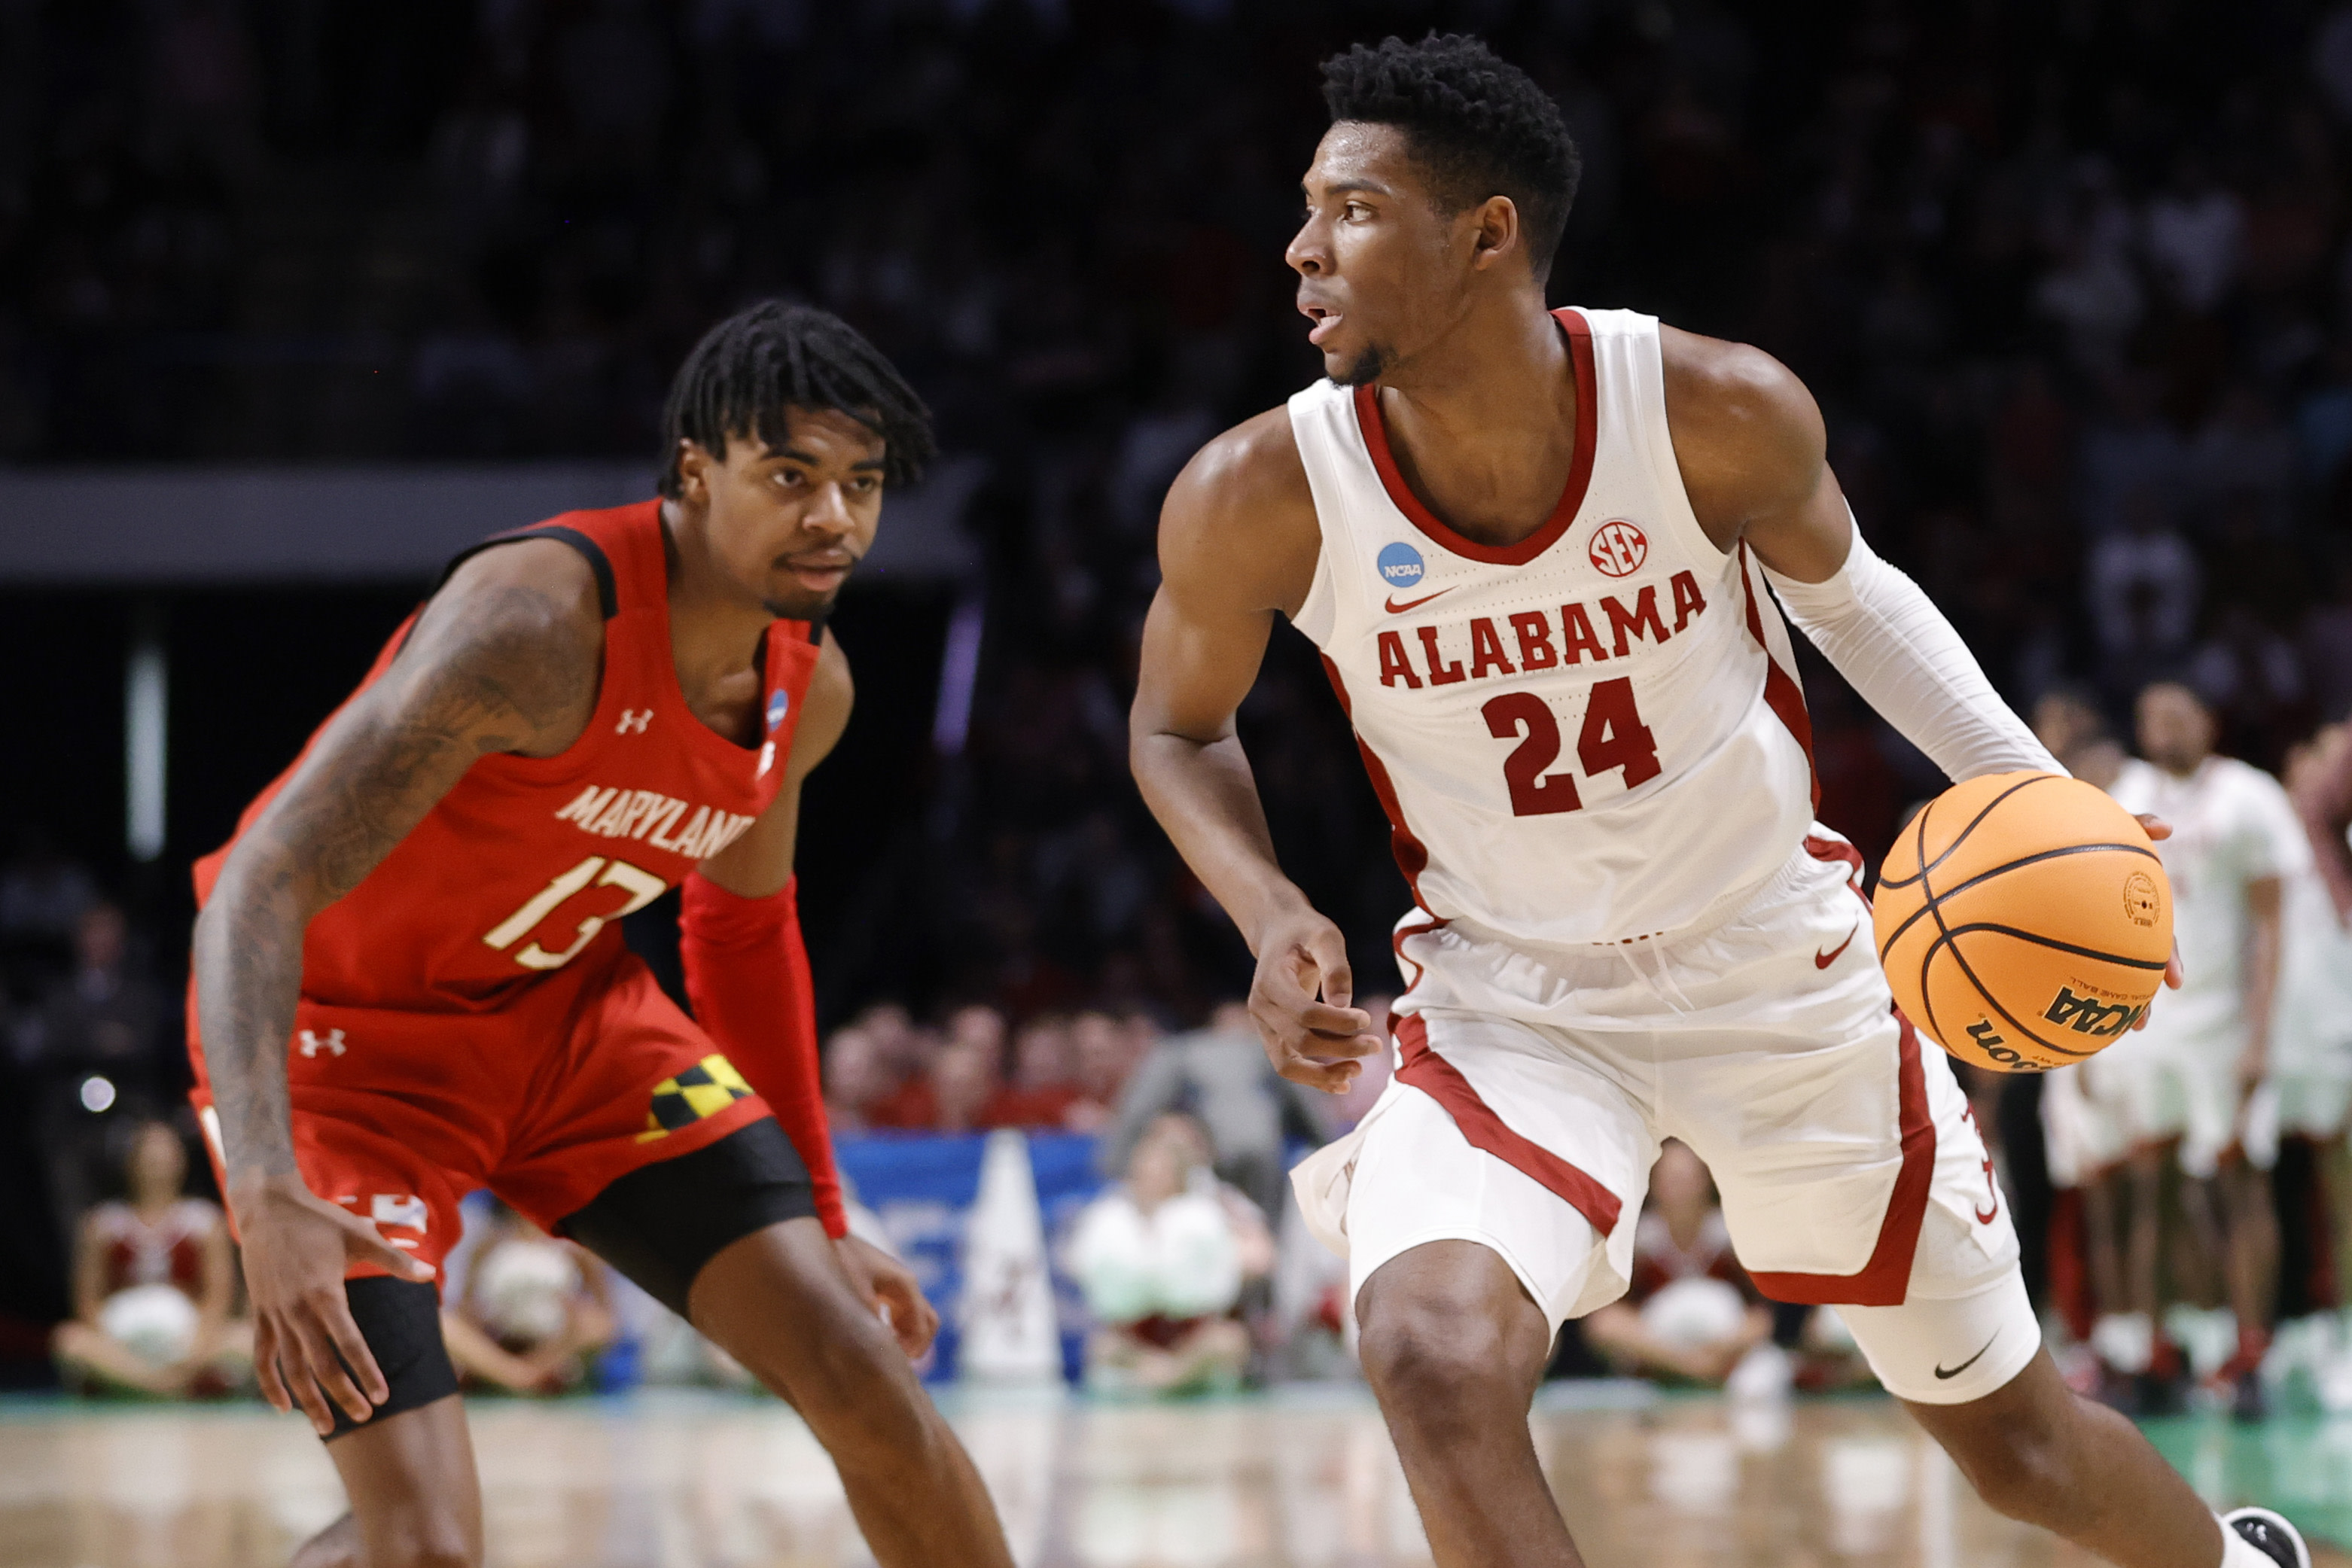 The top 25 returning men's basketball players for the 2022-2023 season,  ranked by Andy Katz